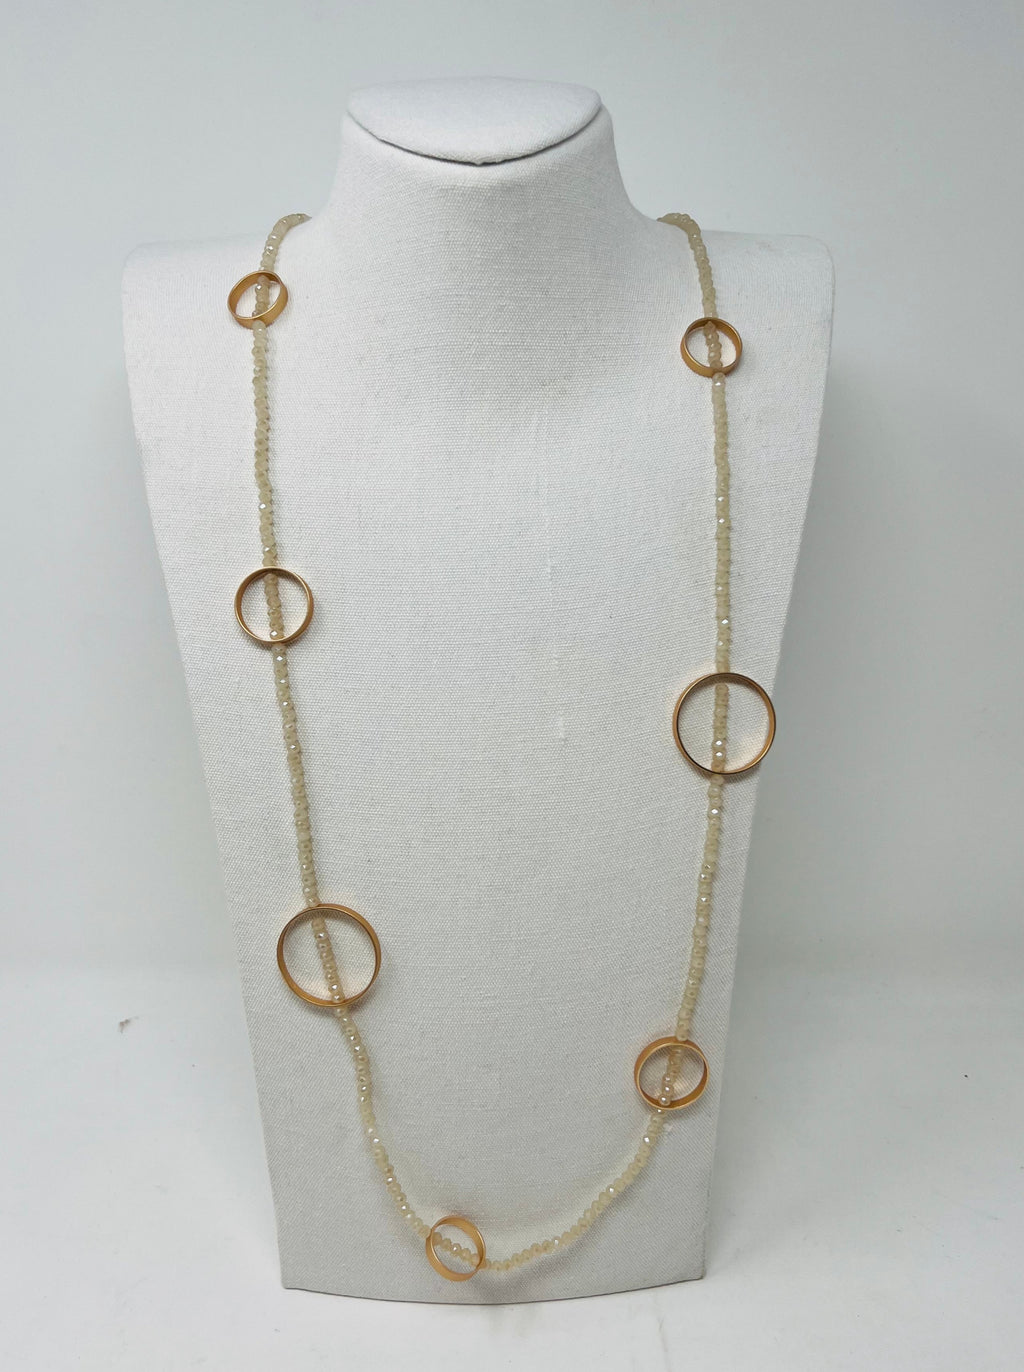 Lone Chain necklace Stretch band